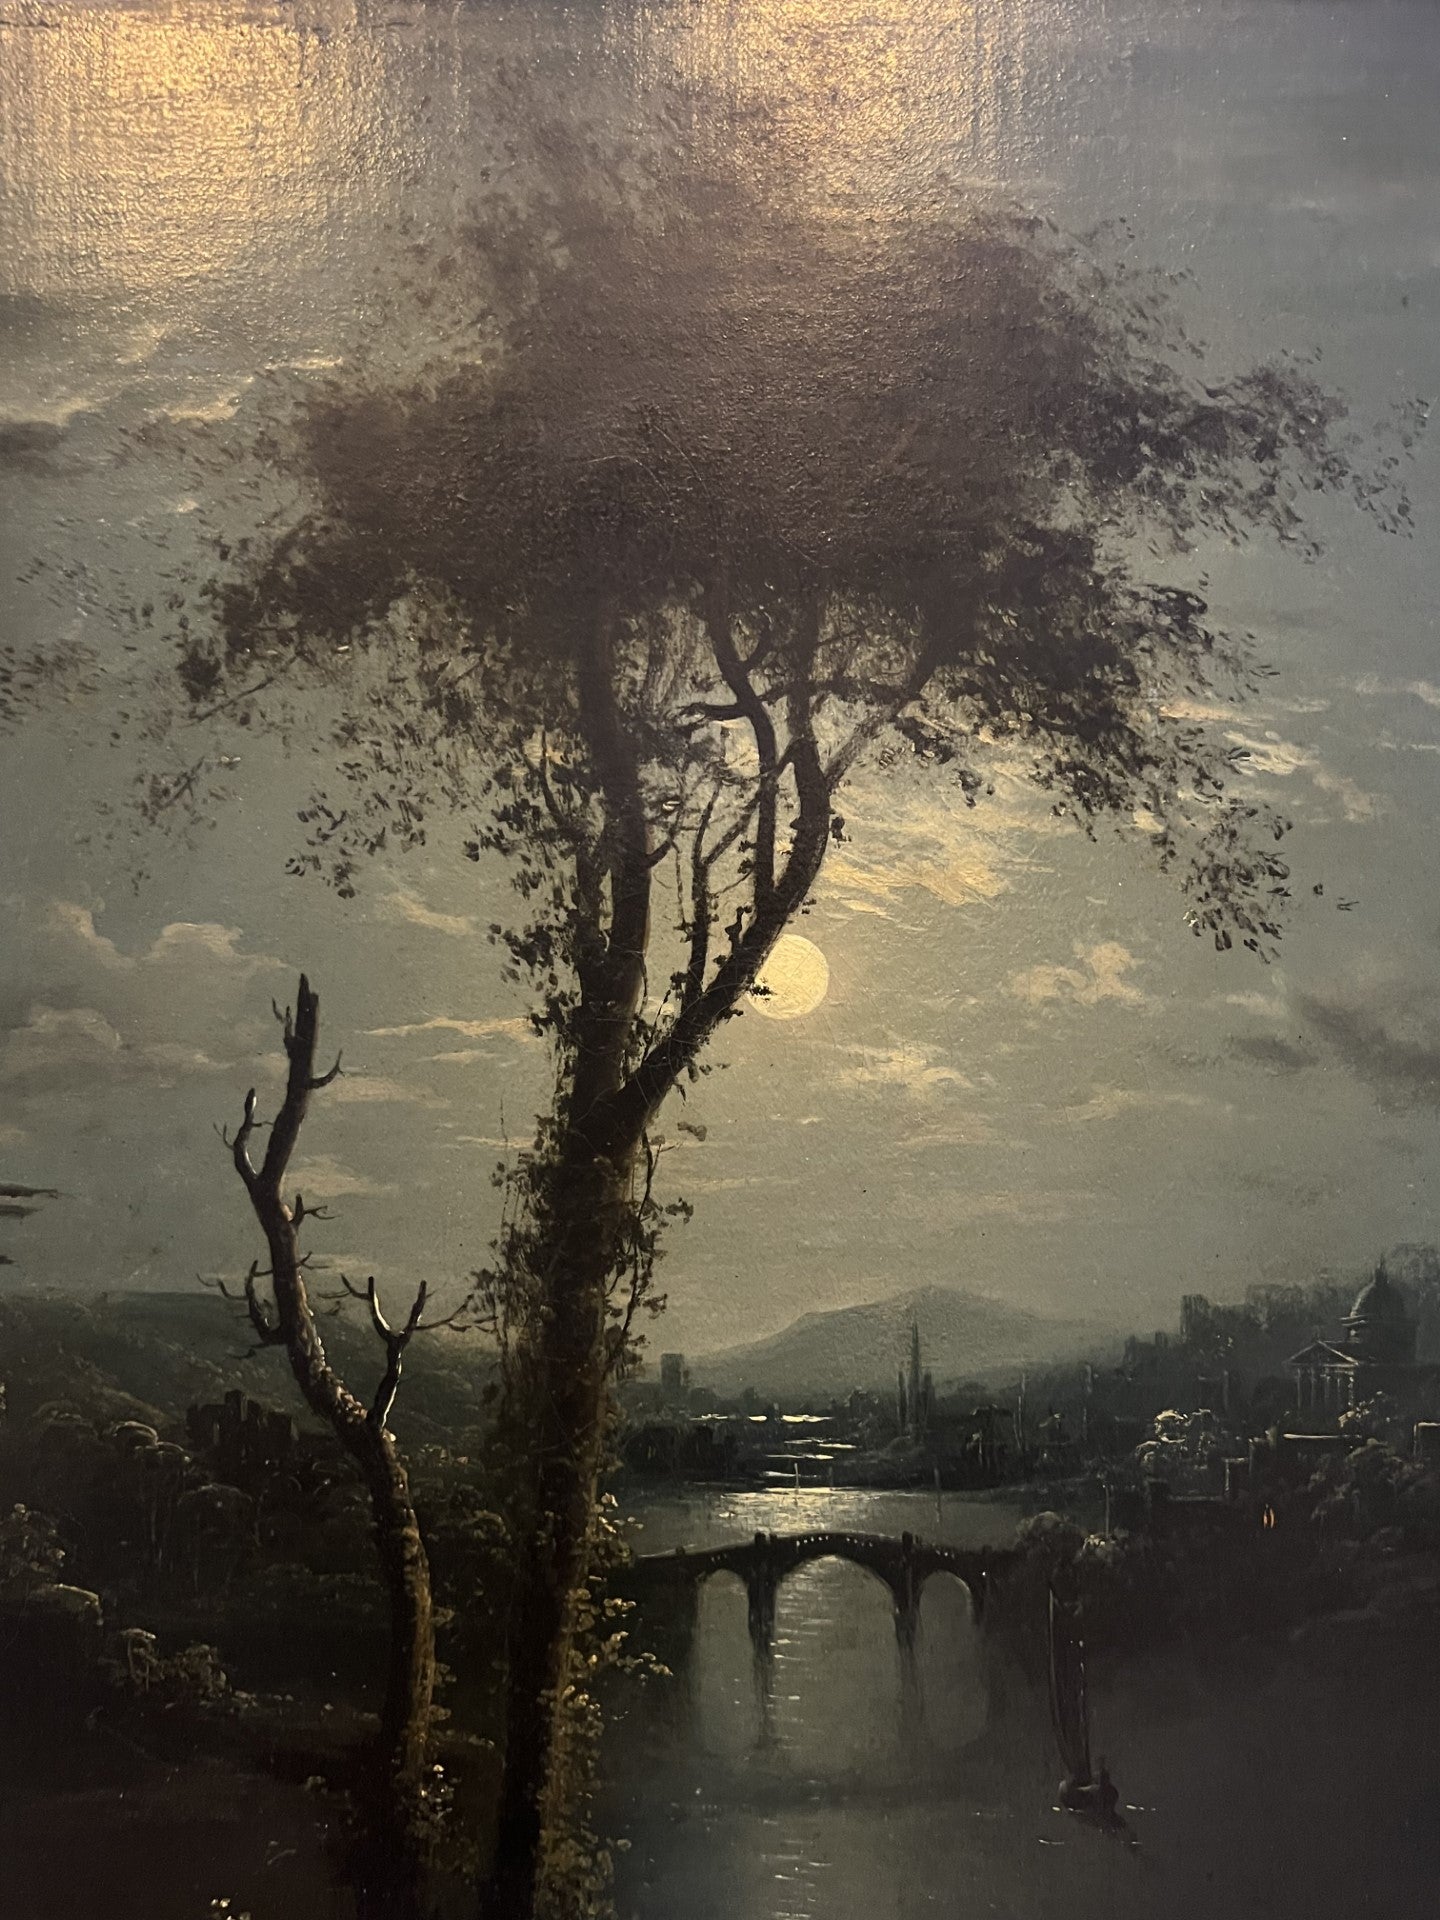 ATTRIBUTED TO SEBASTIAN PETHER 1793-1844 OIL ON CANVAS "MOONLIGHT RIVER SCENE"